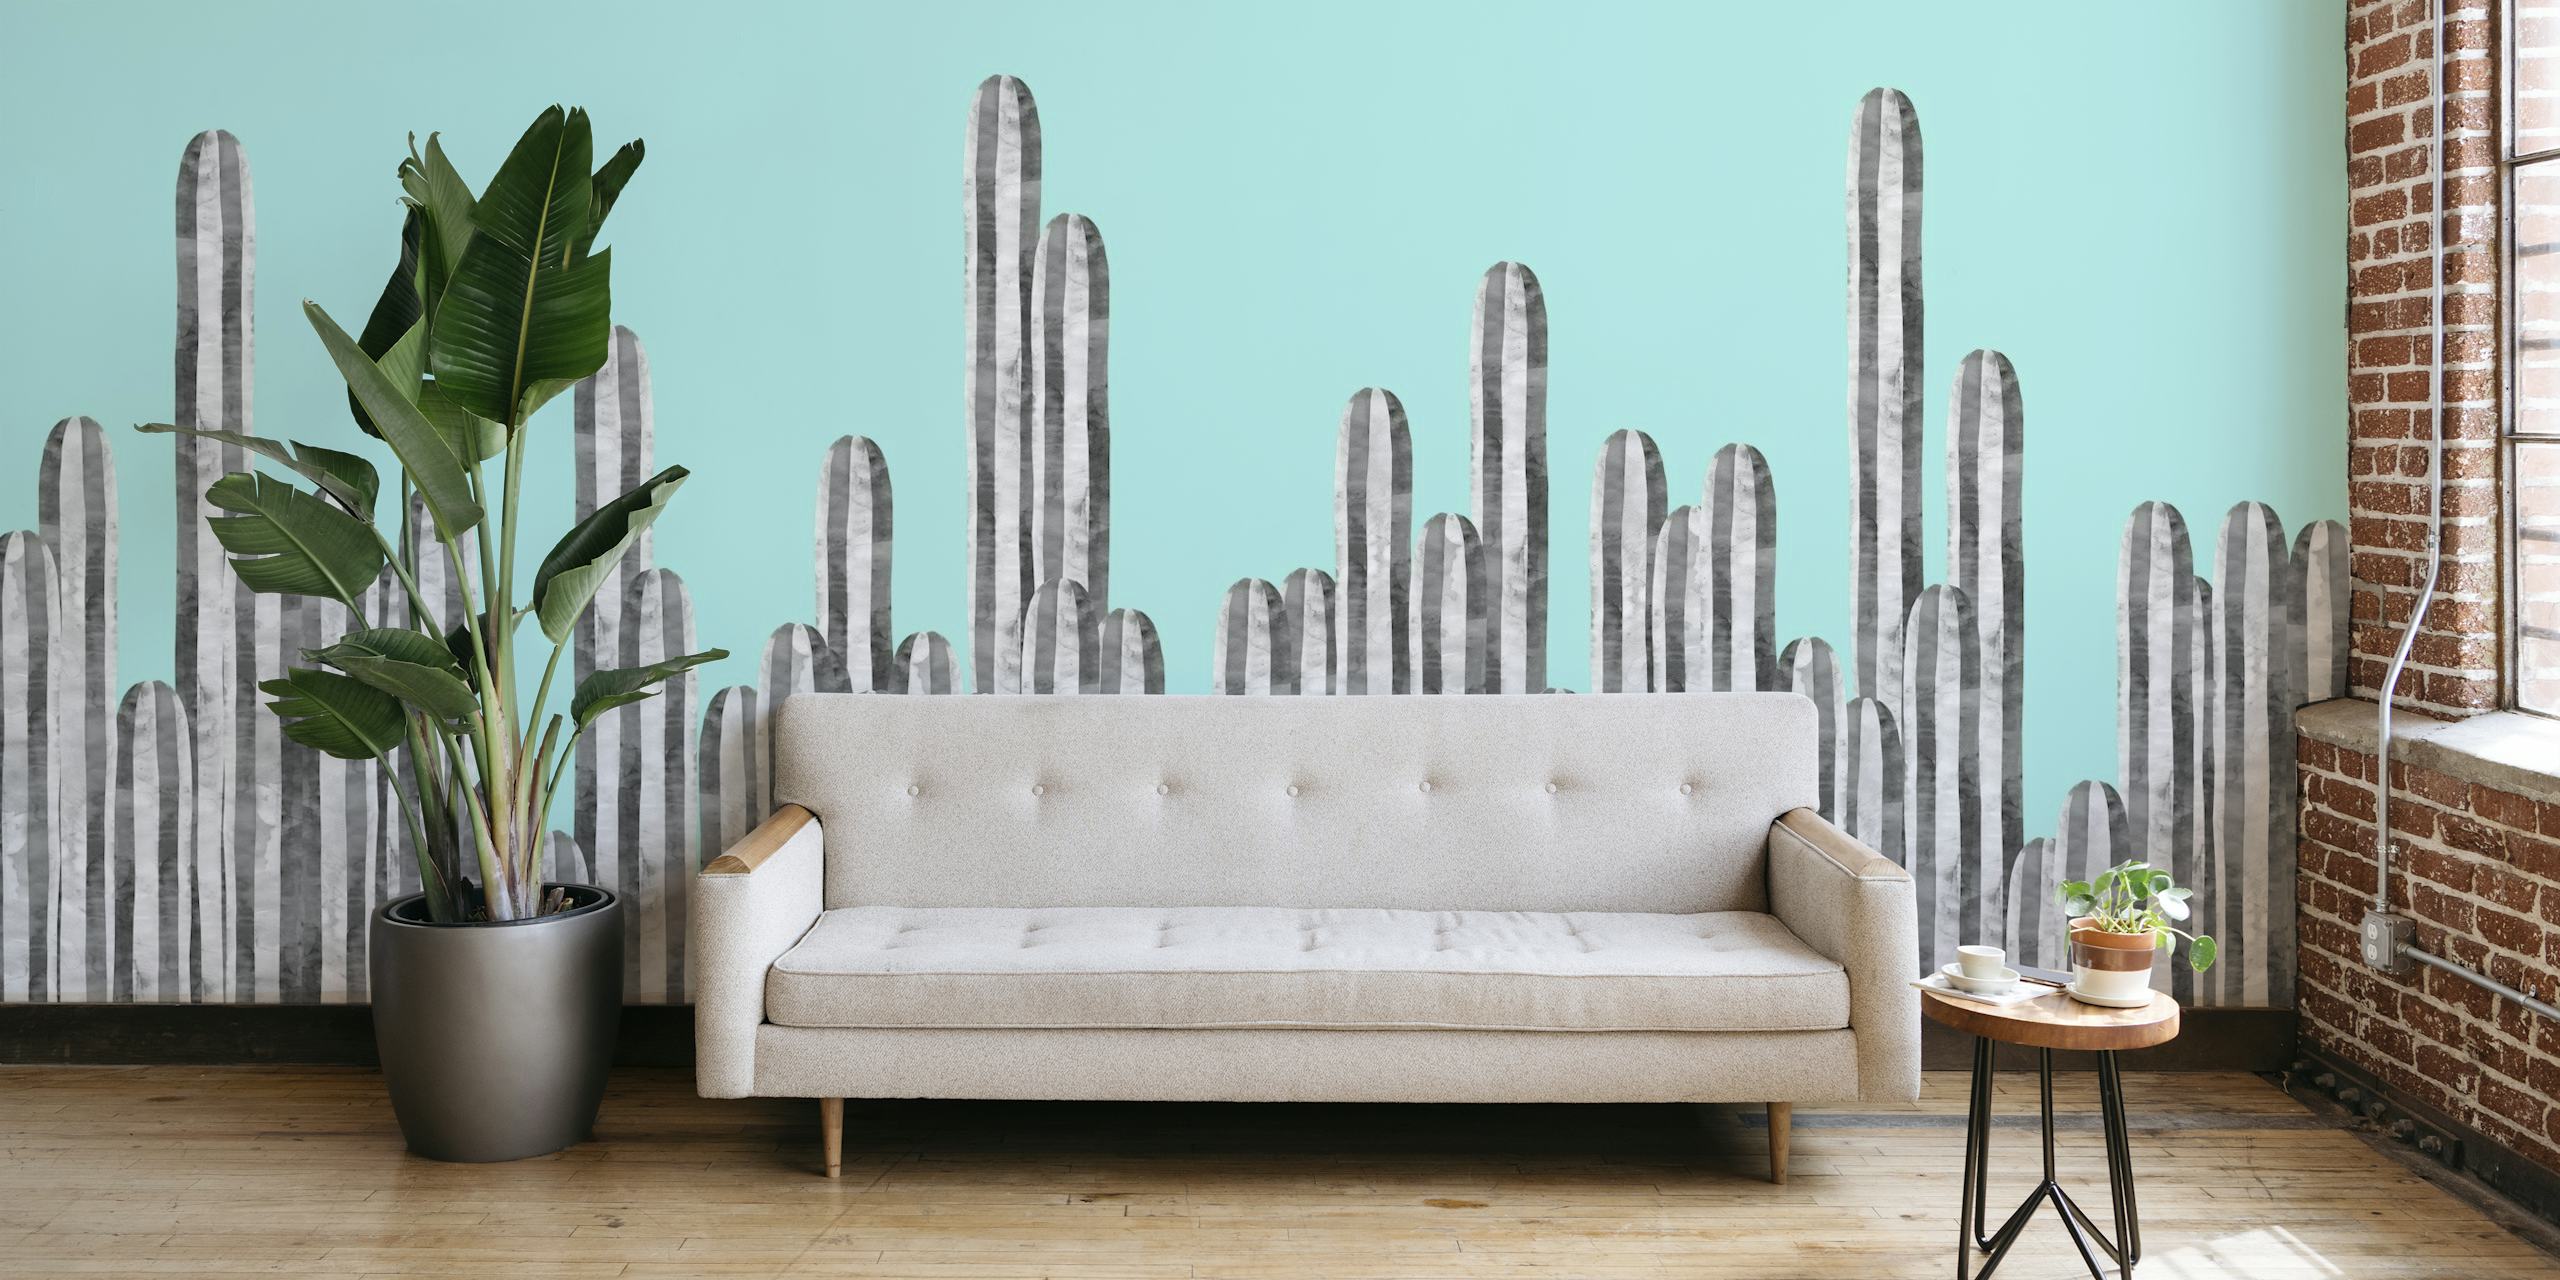 Cactus Landscape Wall Mural with pastel turquoise background and cactus silhouettes